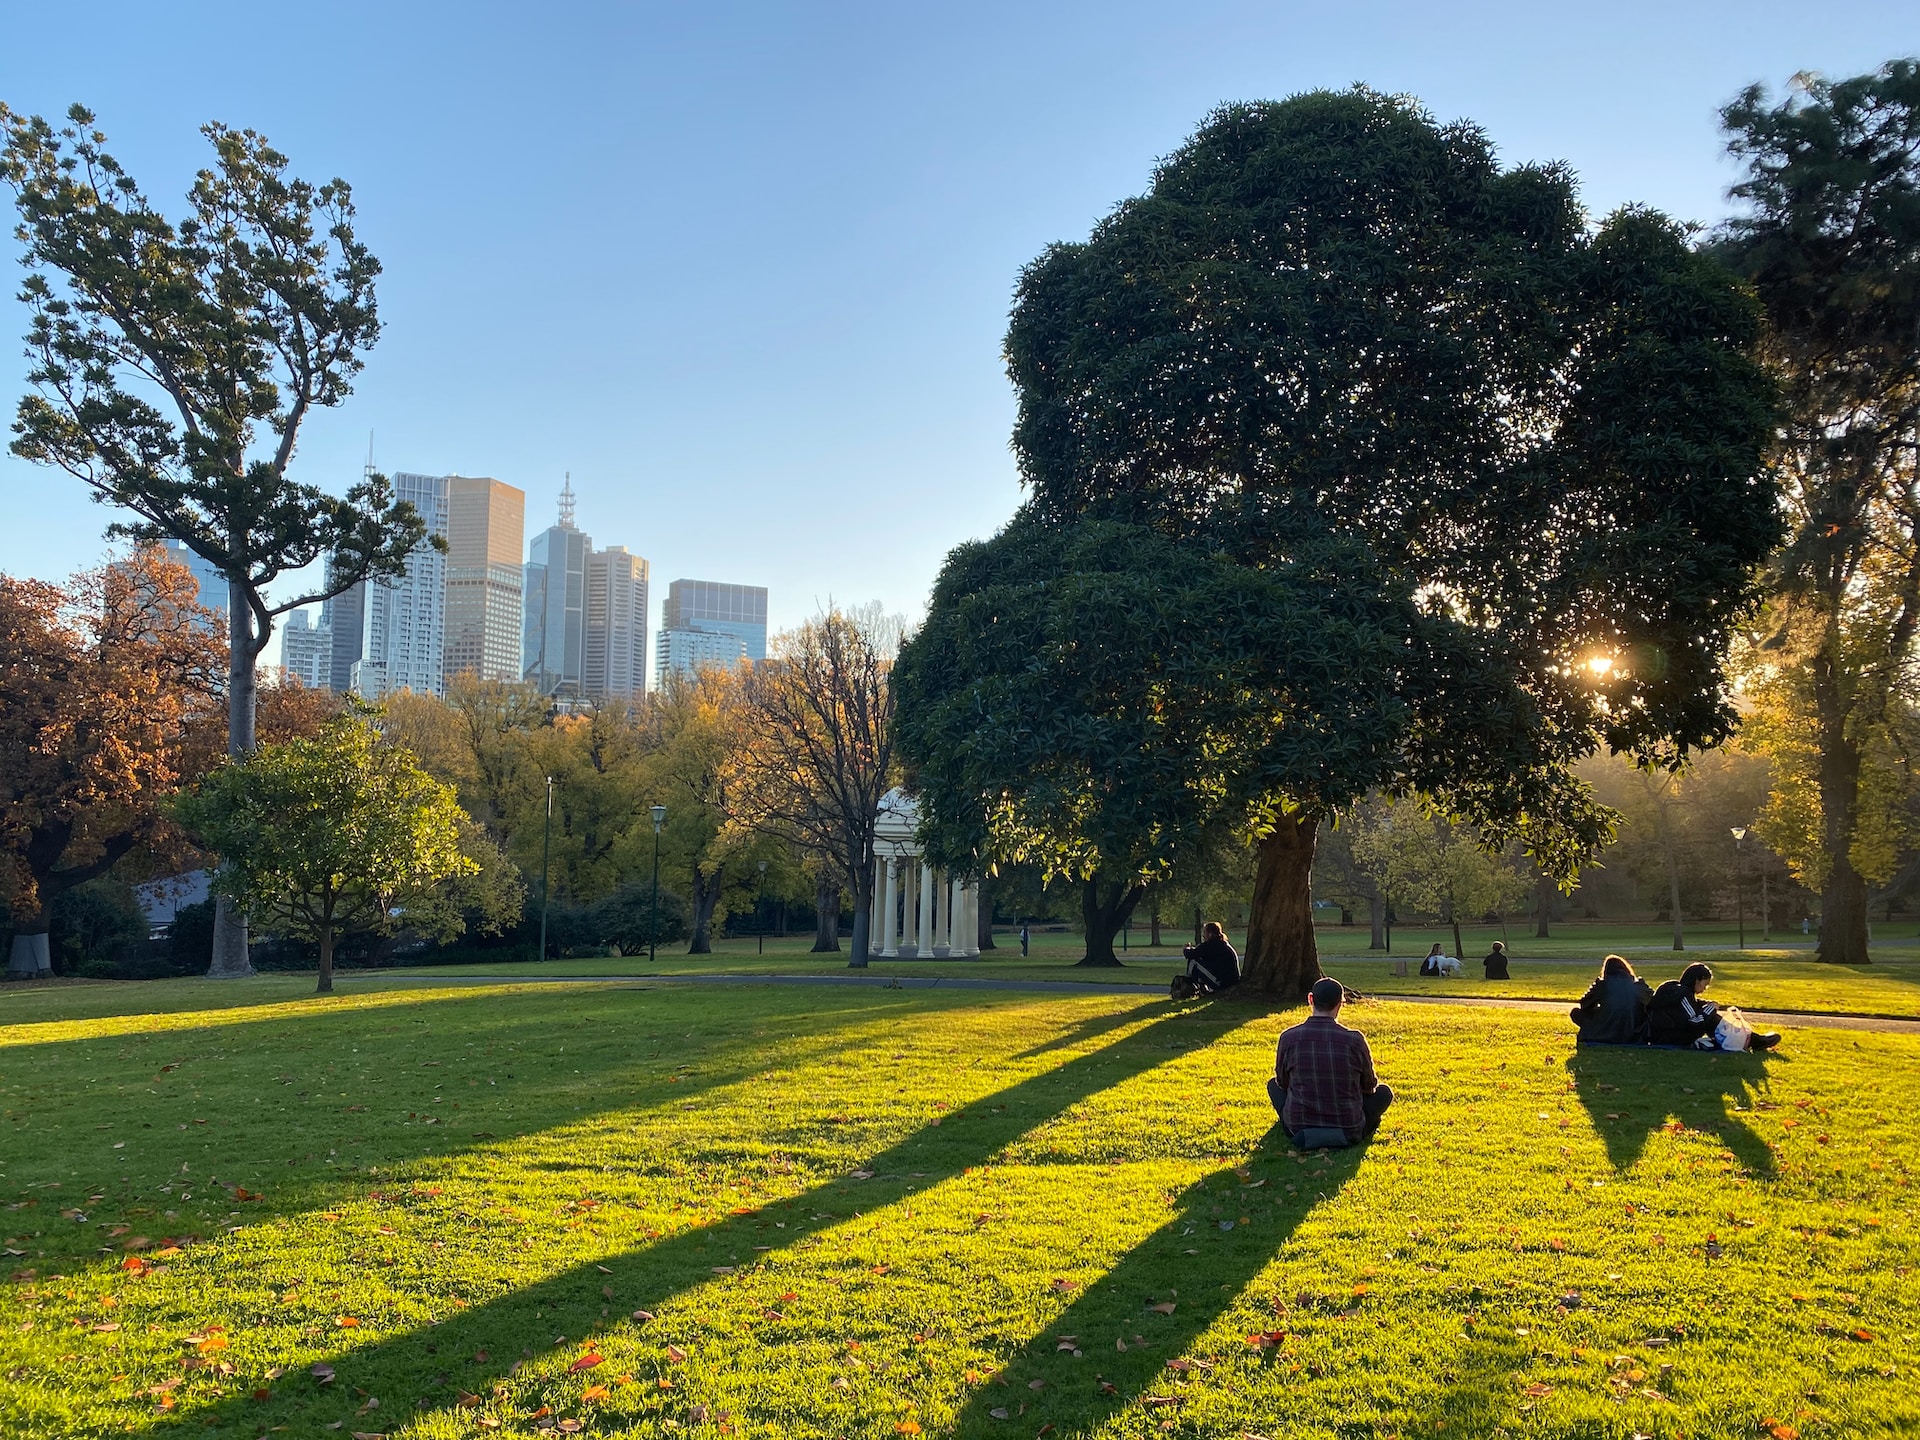 green grass field with trees and buildings in distance